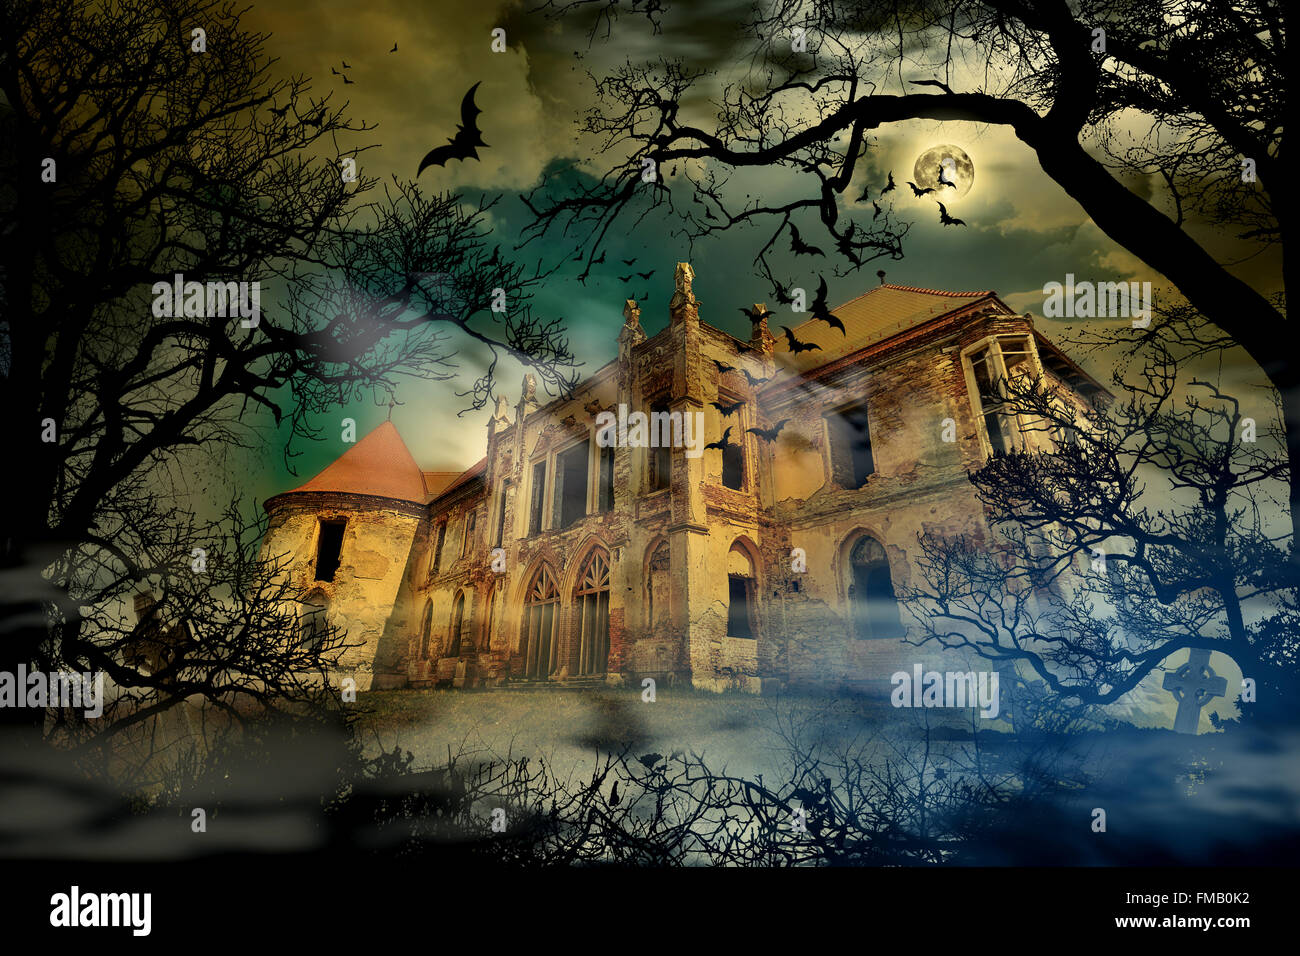 Haunted castle in creepy foggy background with tree silhouettes. Stock Photo